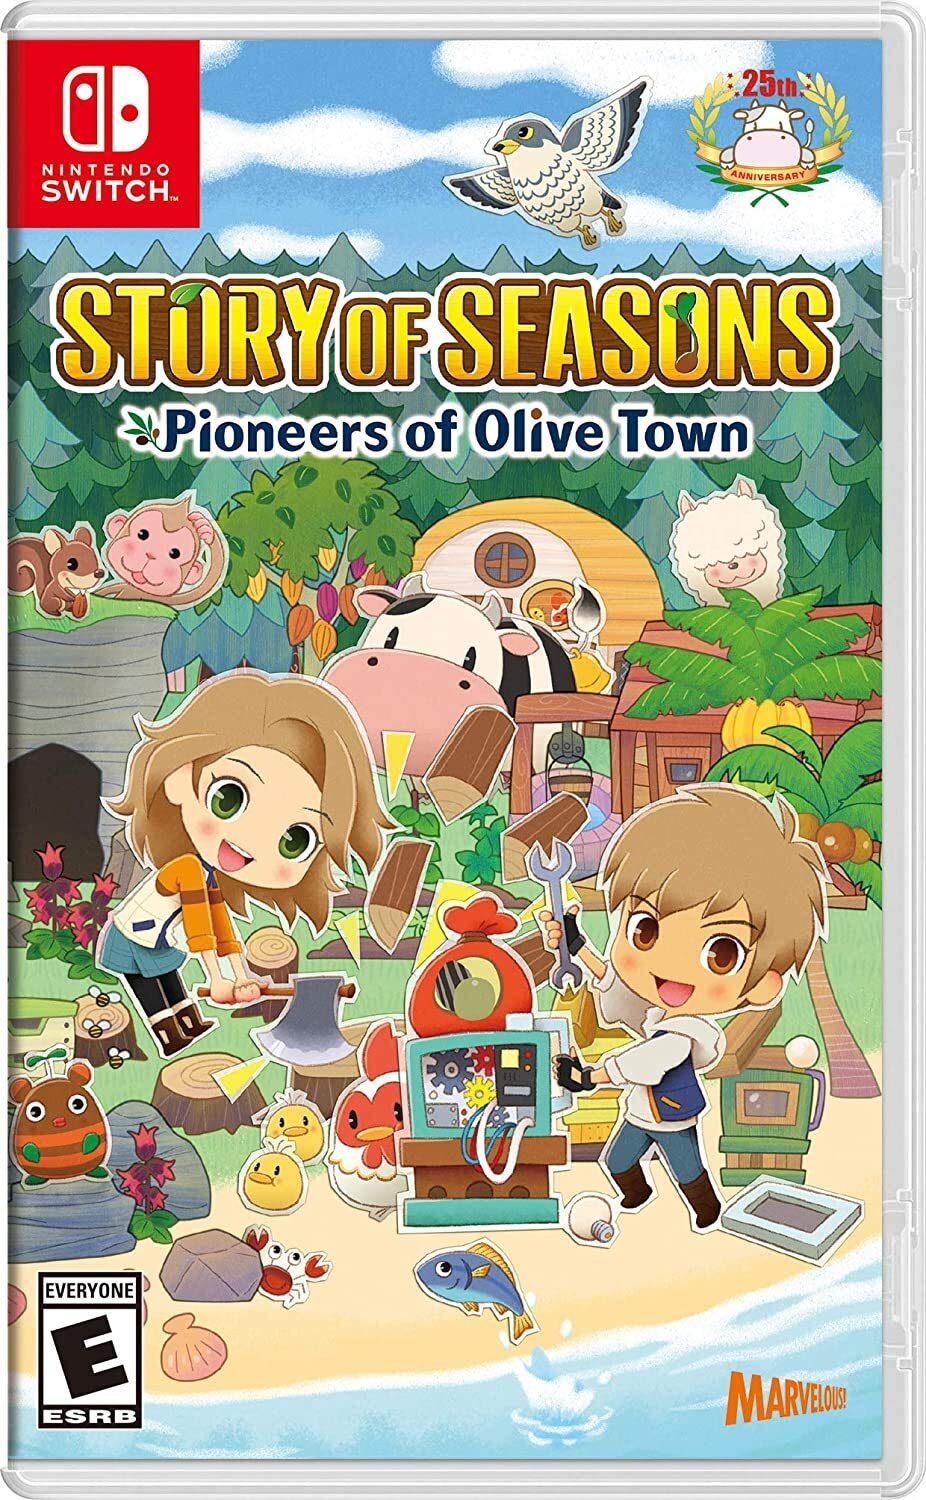 Story of Seasons Pioneers of Olive Town - Nintendo Switch